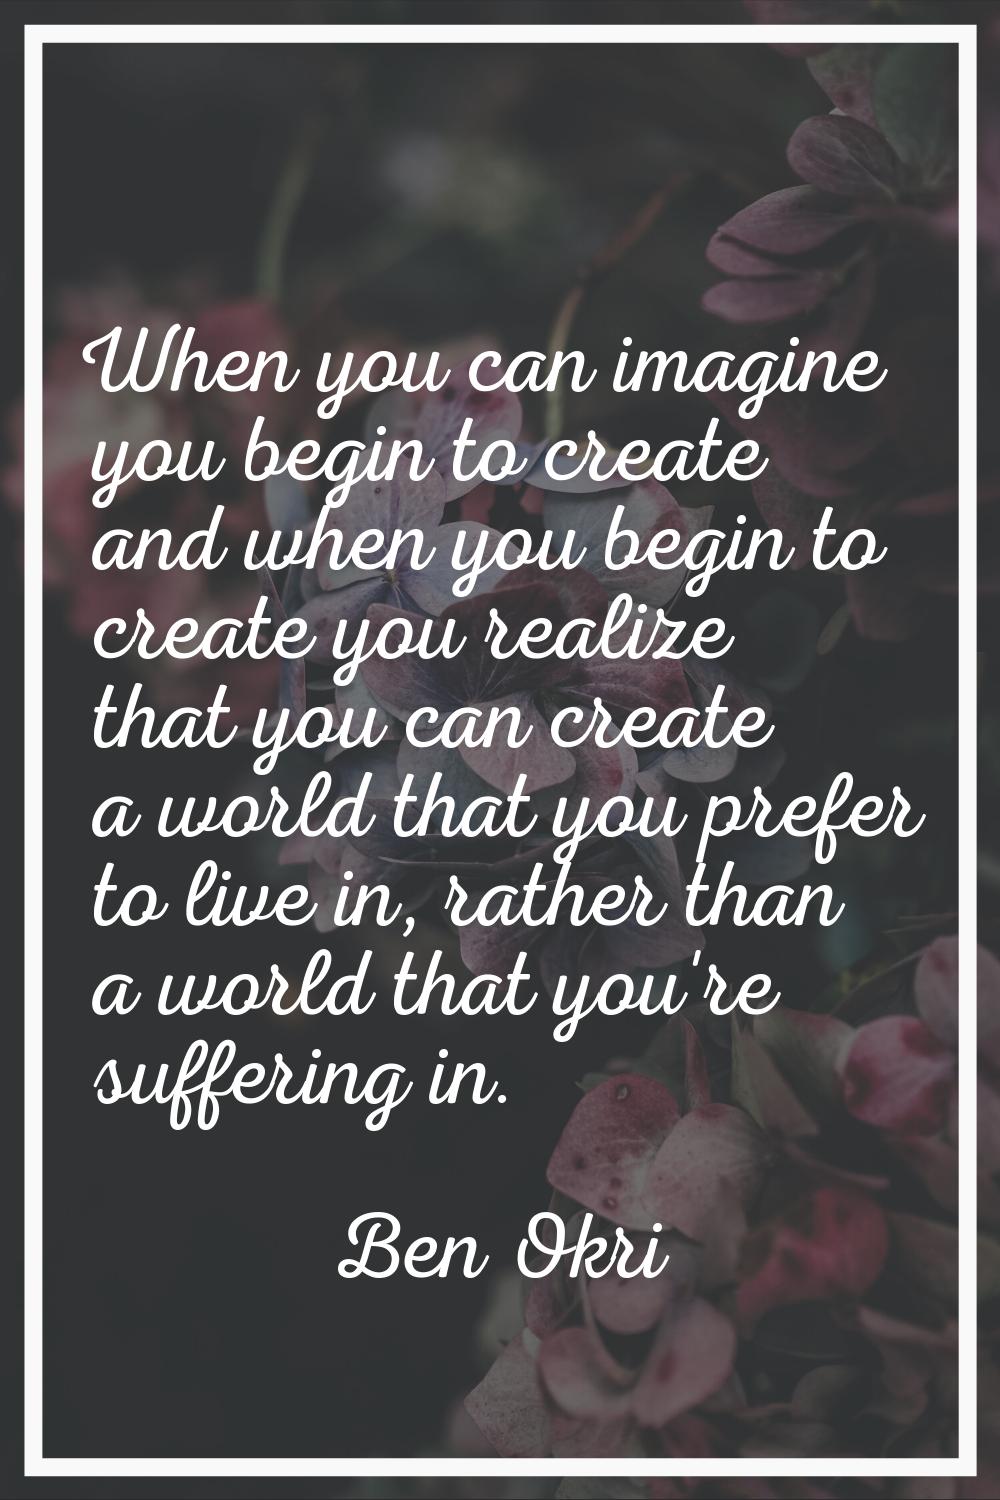 When you can imagine you begin to create and when you begin to create you realize that you can crea